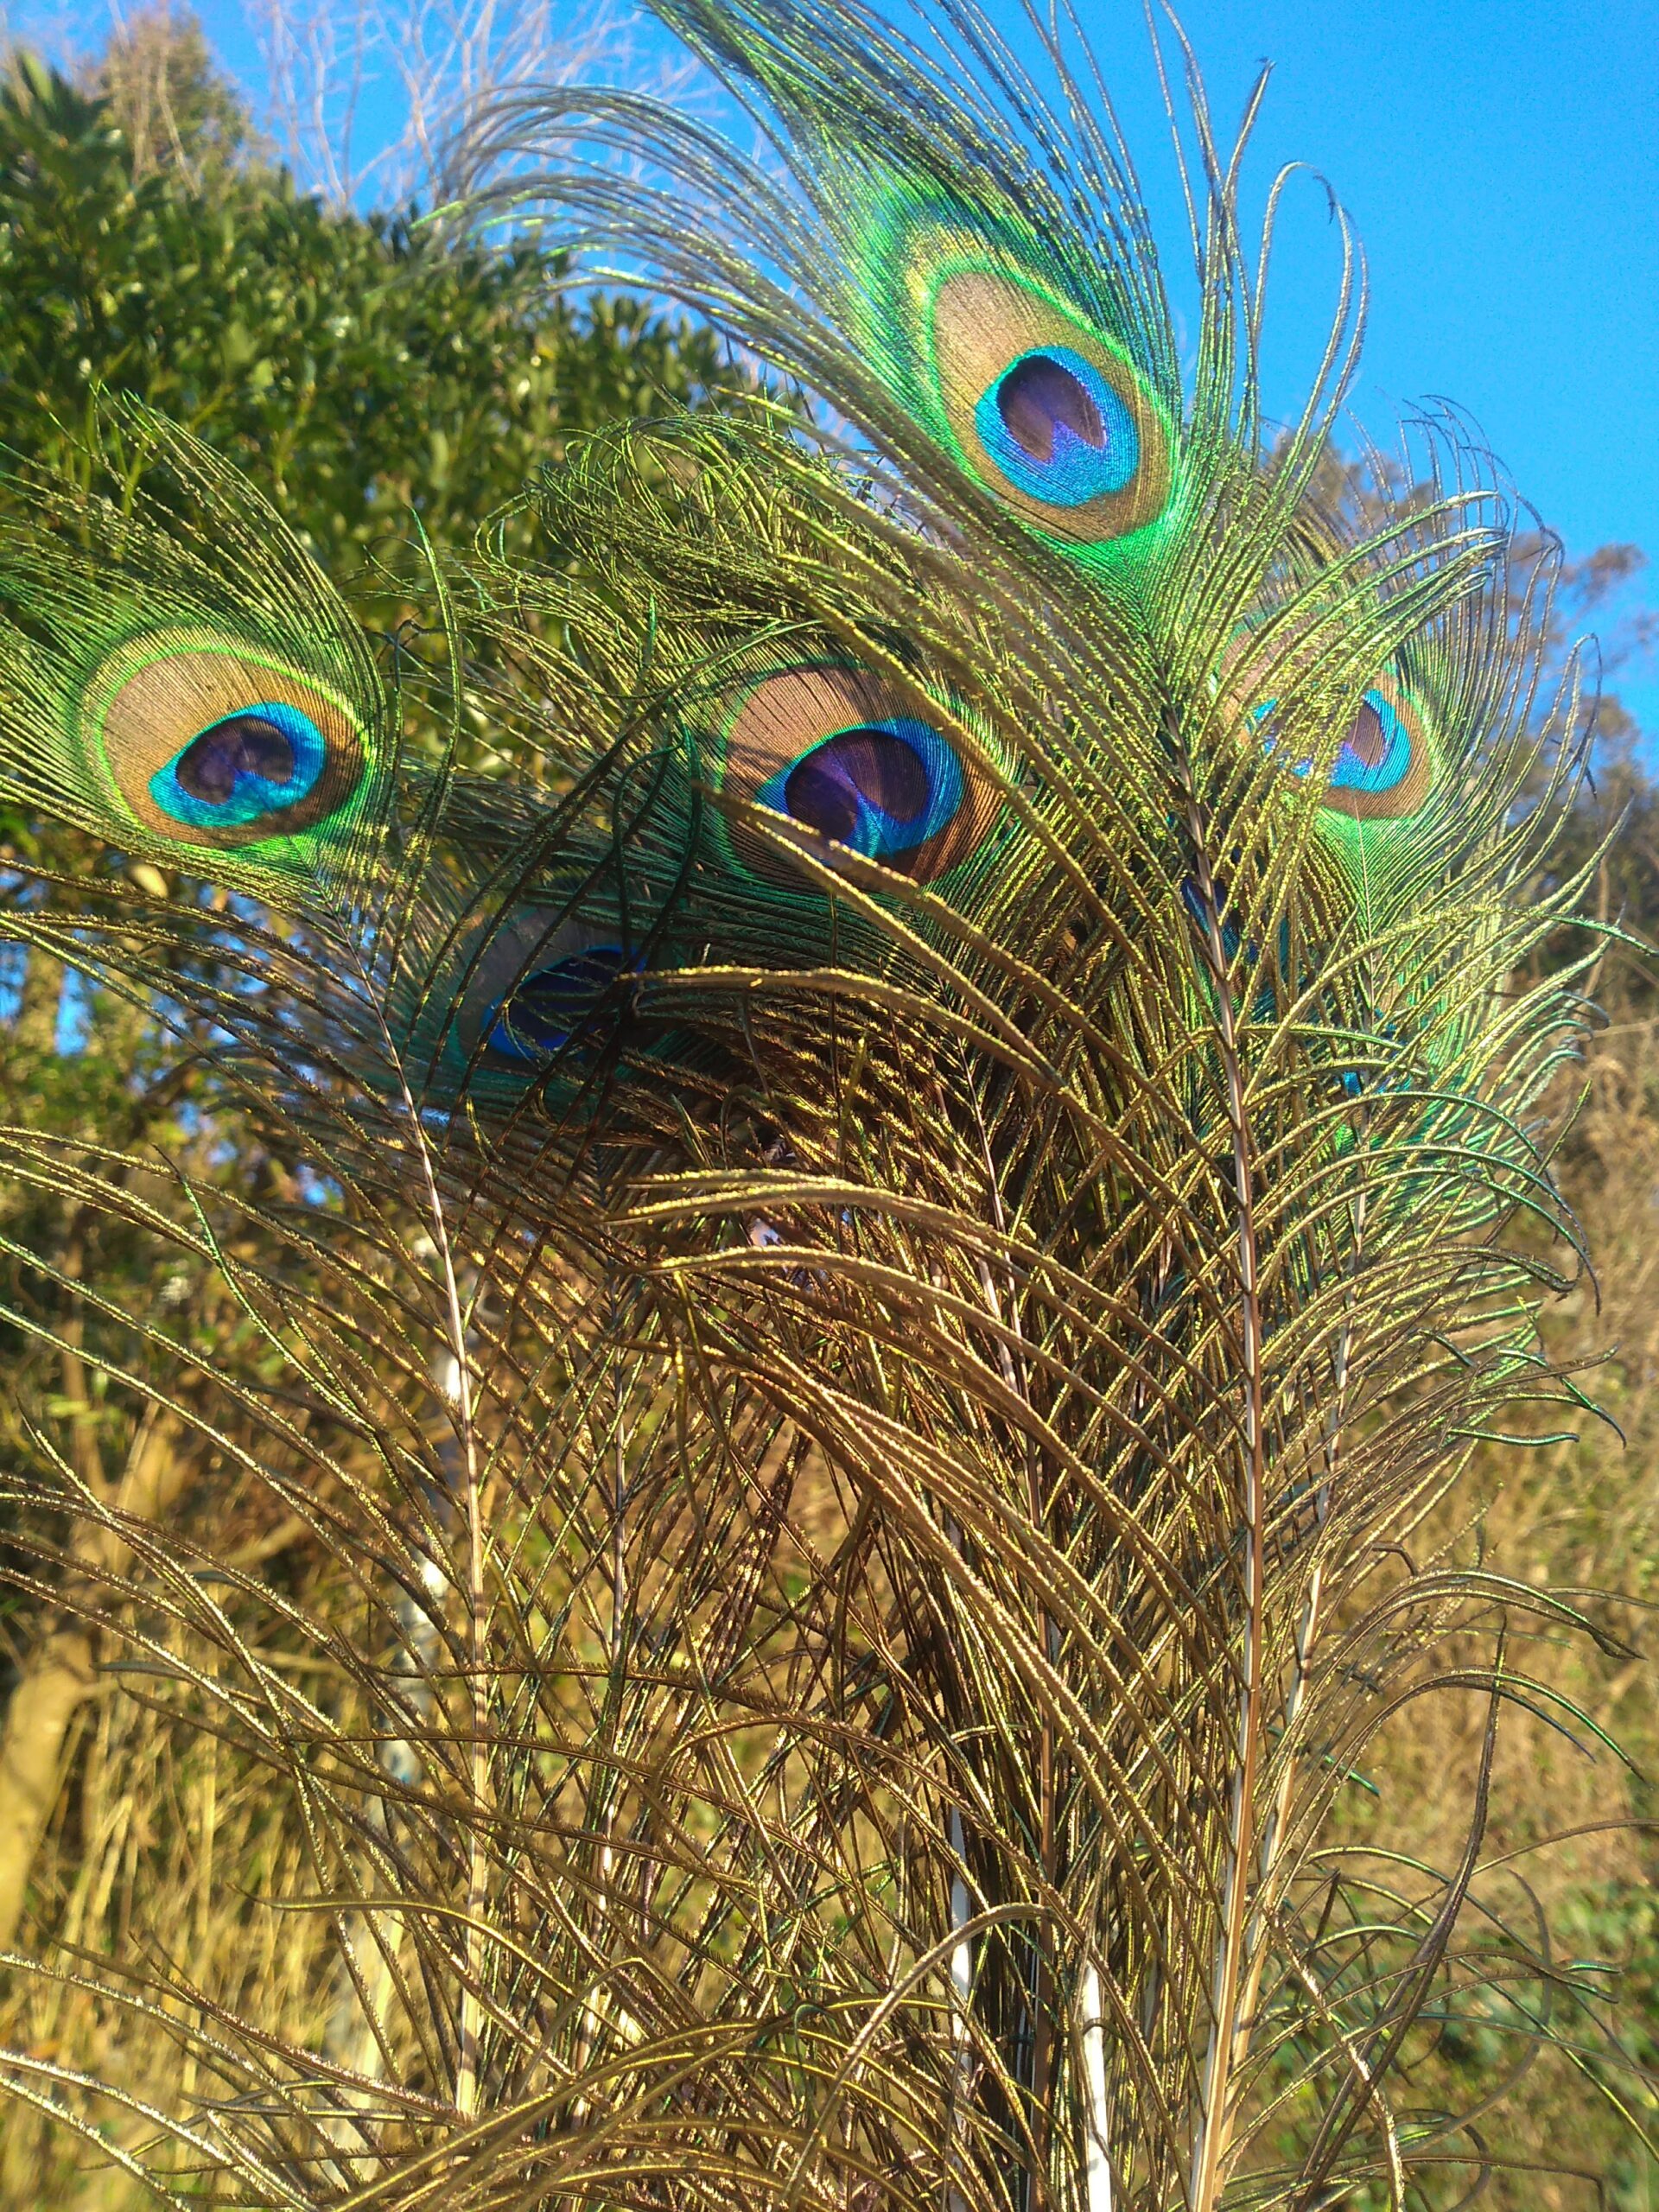 Peacock in the countryside